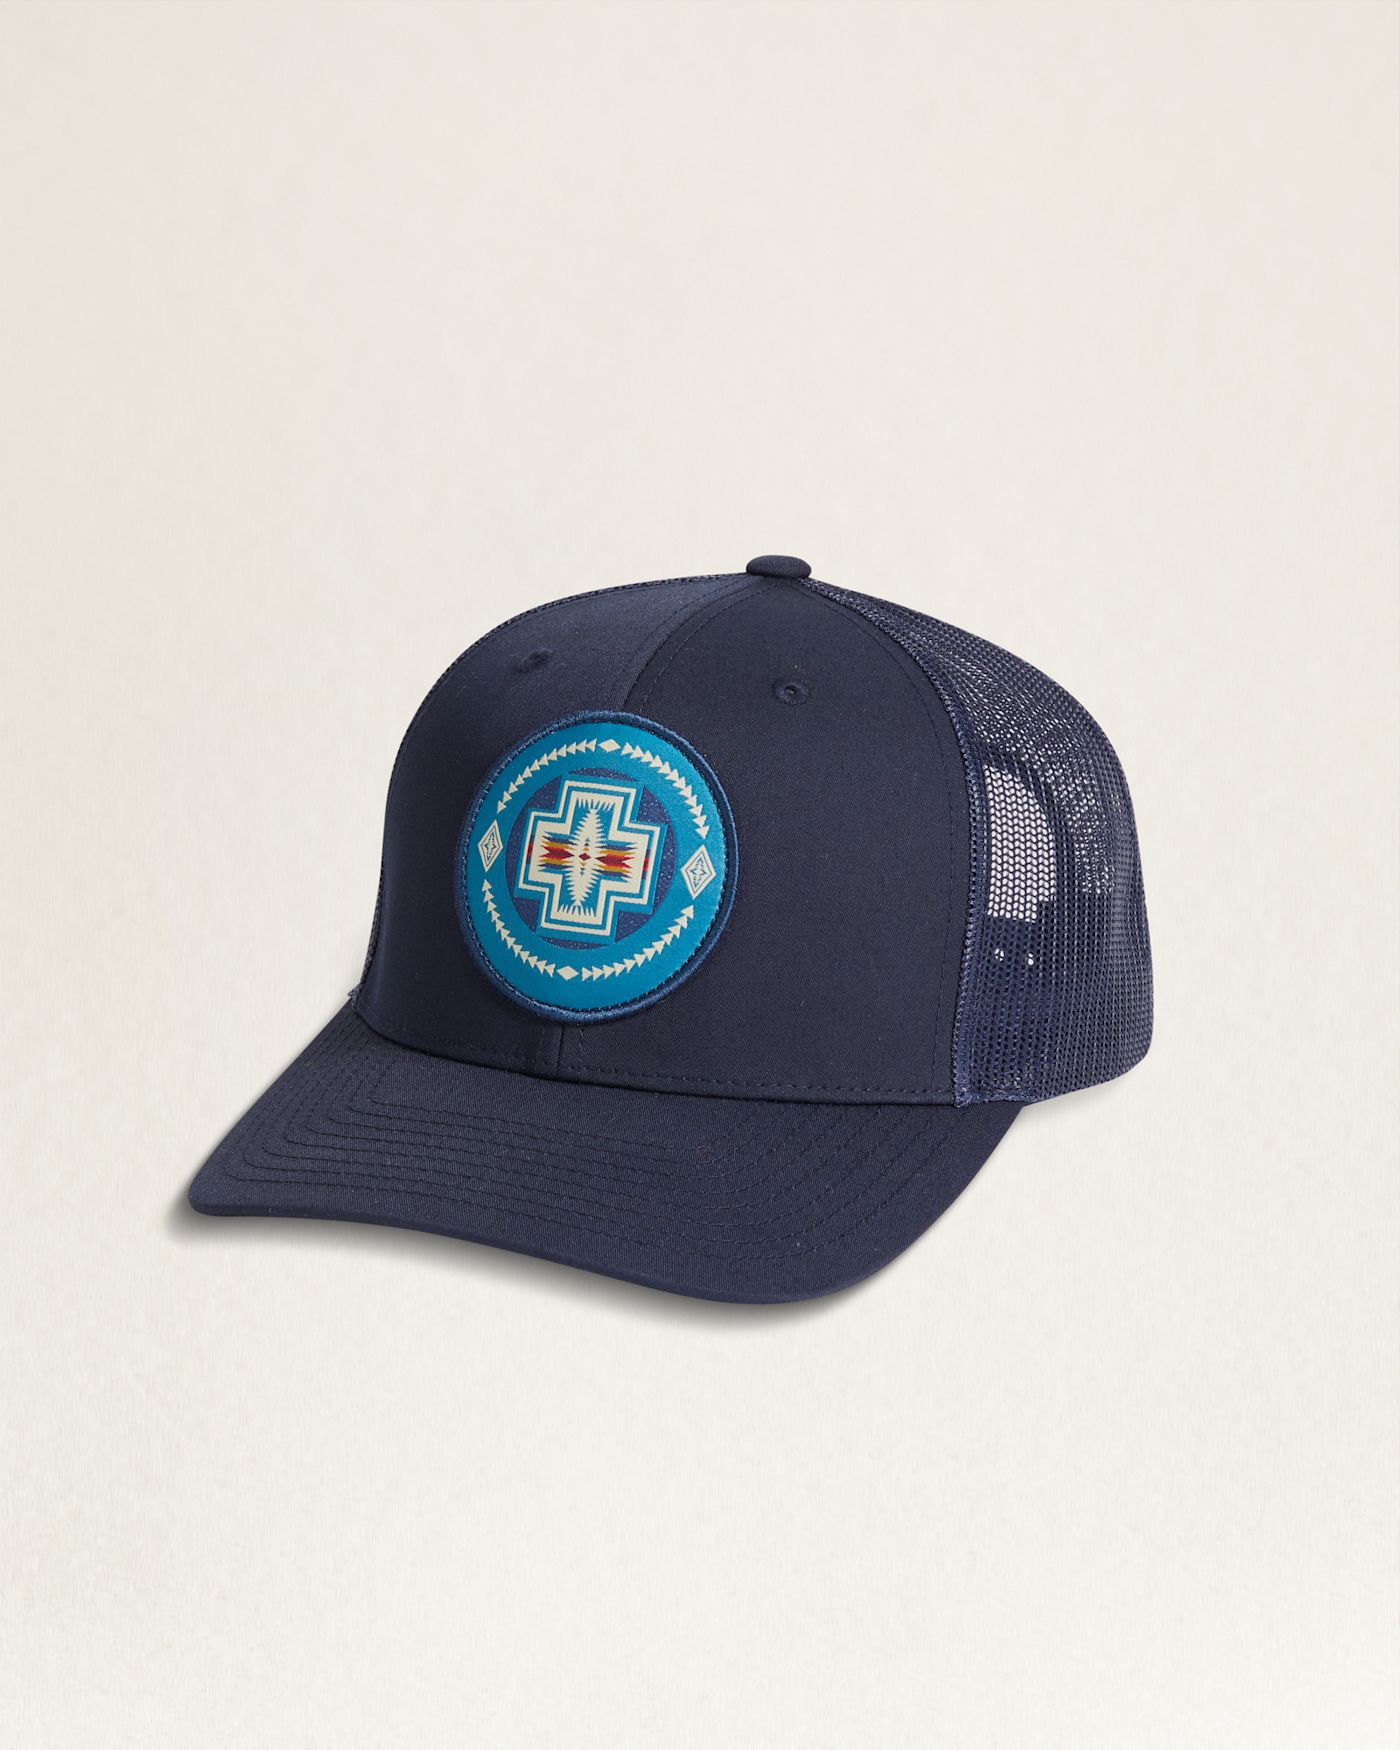 LIMITED EDITION HARDING PATCH TRUCKER HAT